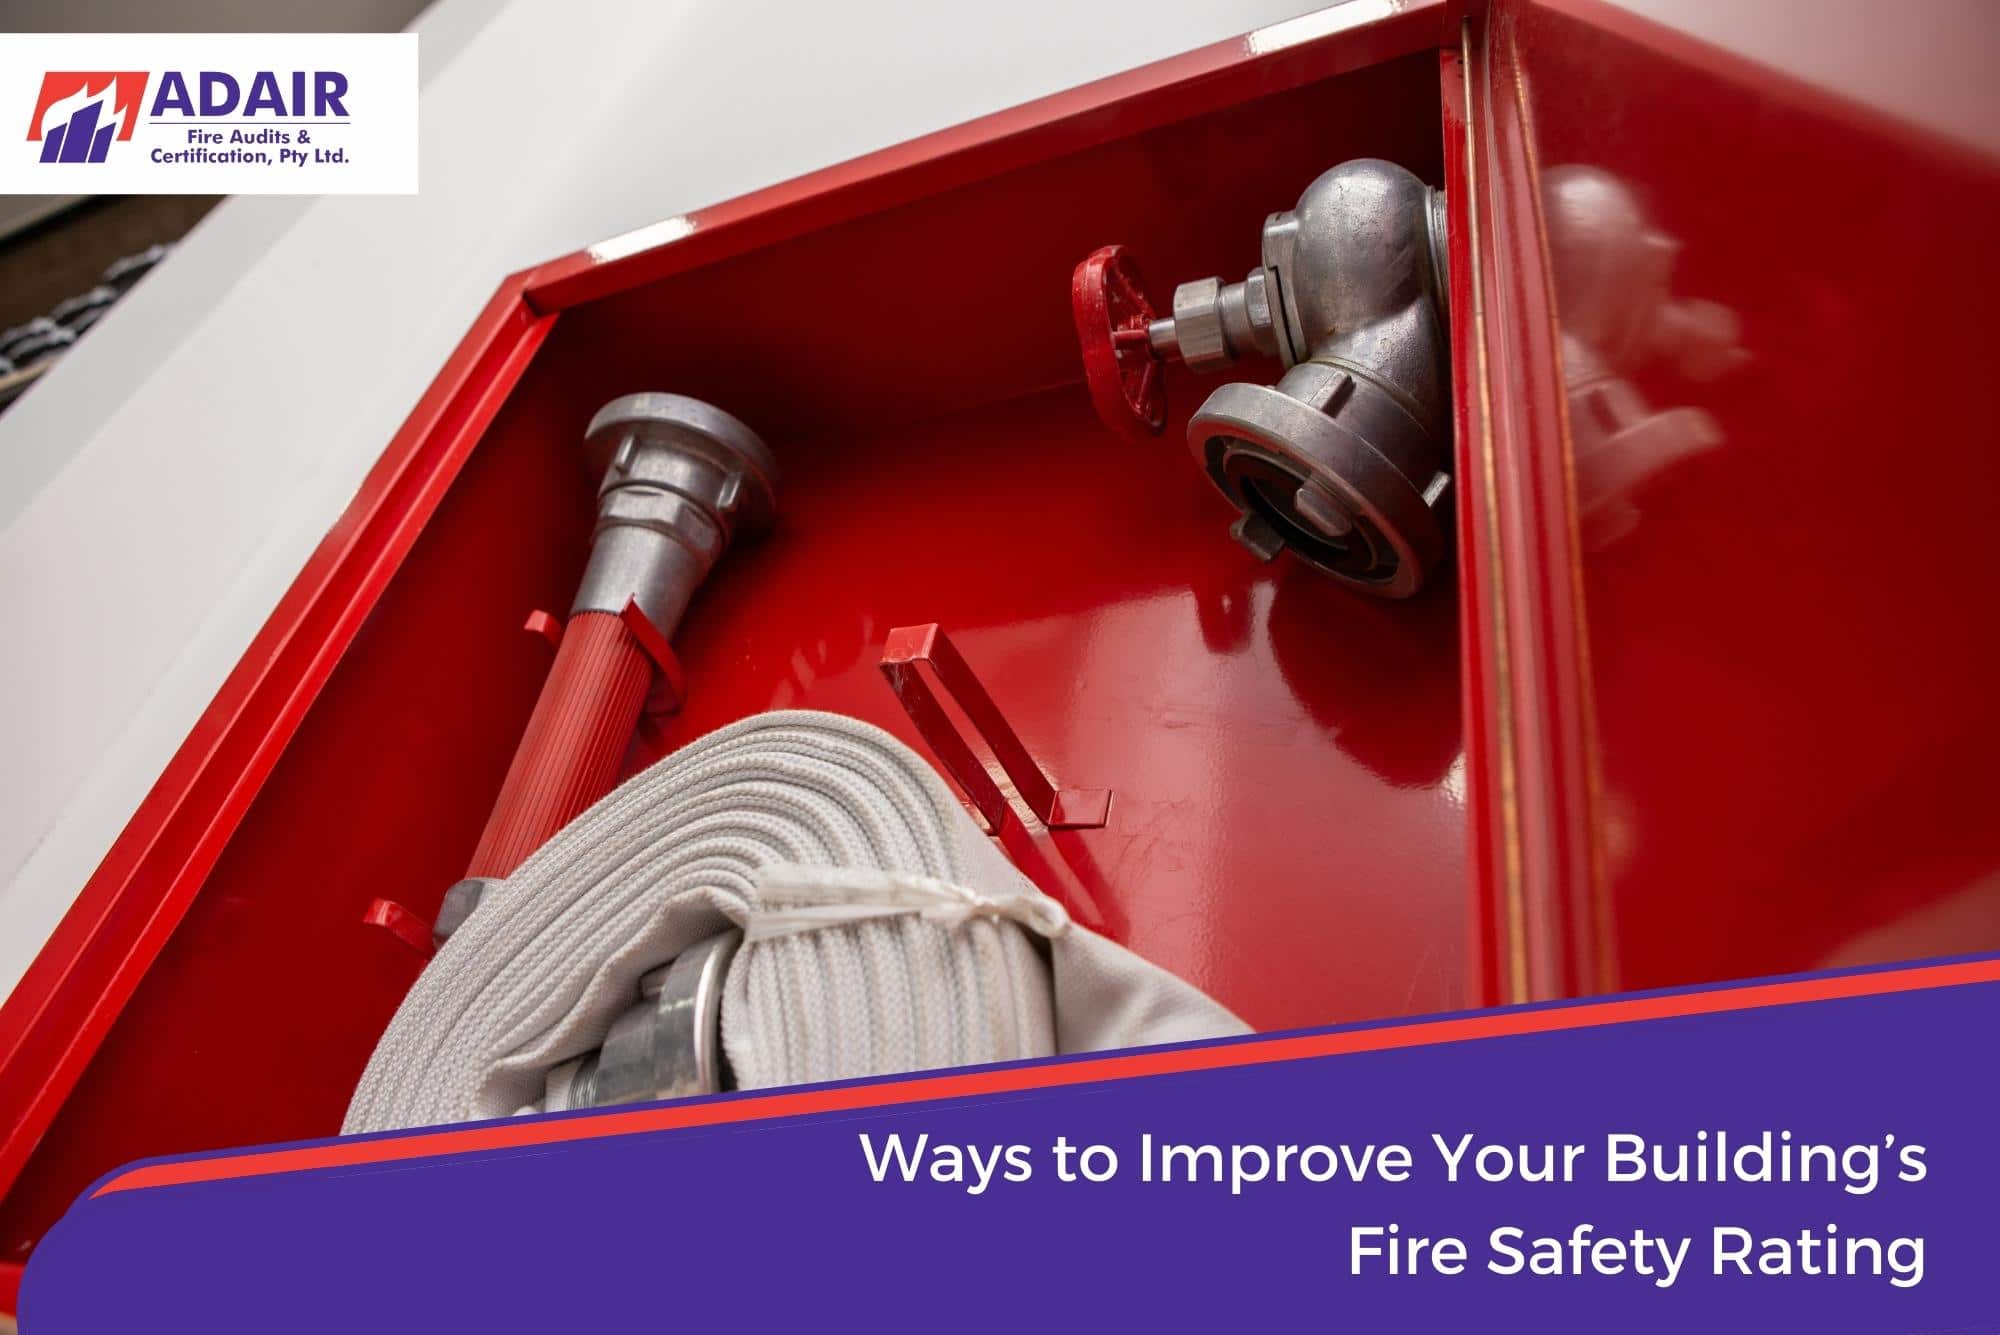 Ways to Improve Your Building’s Fire Safety Rating